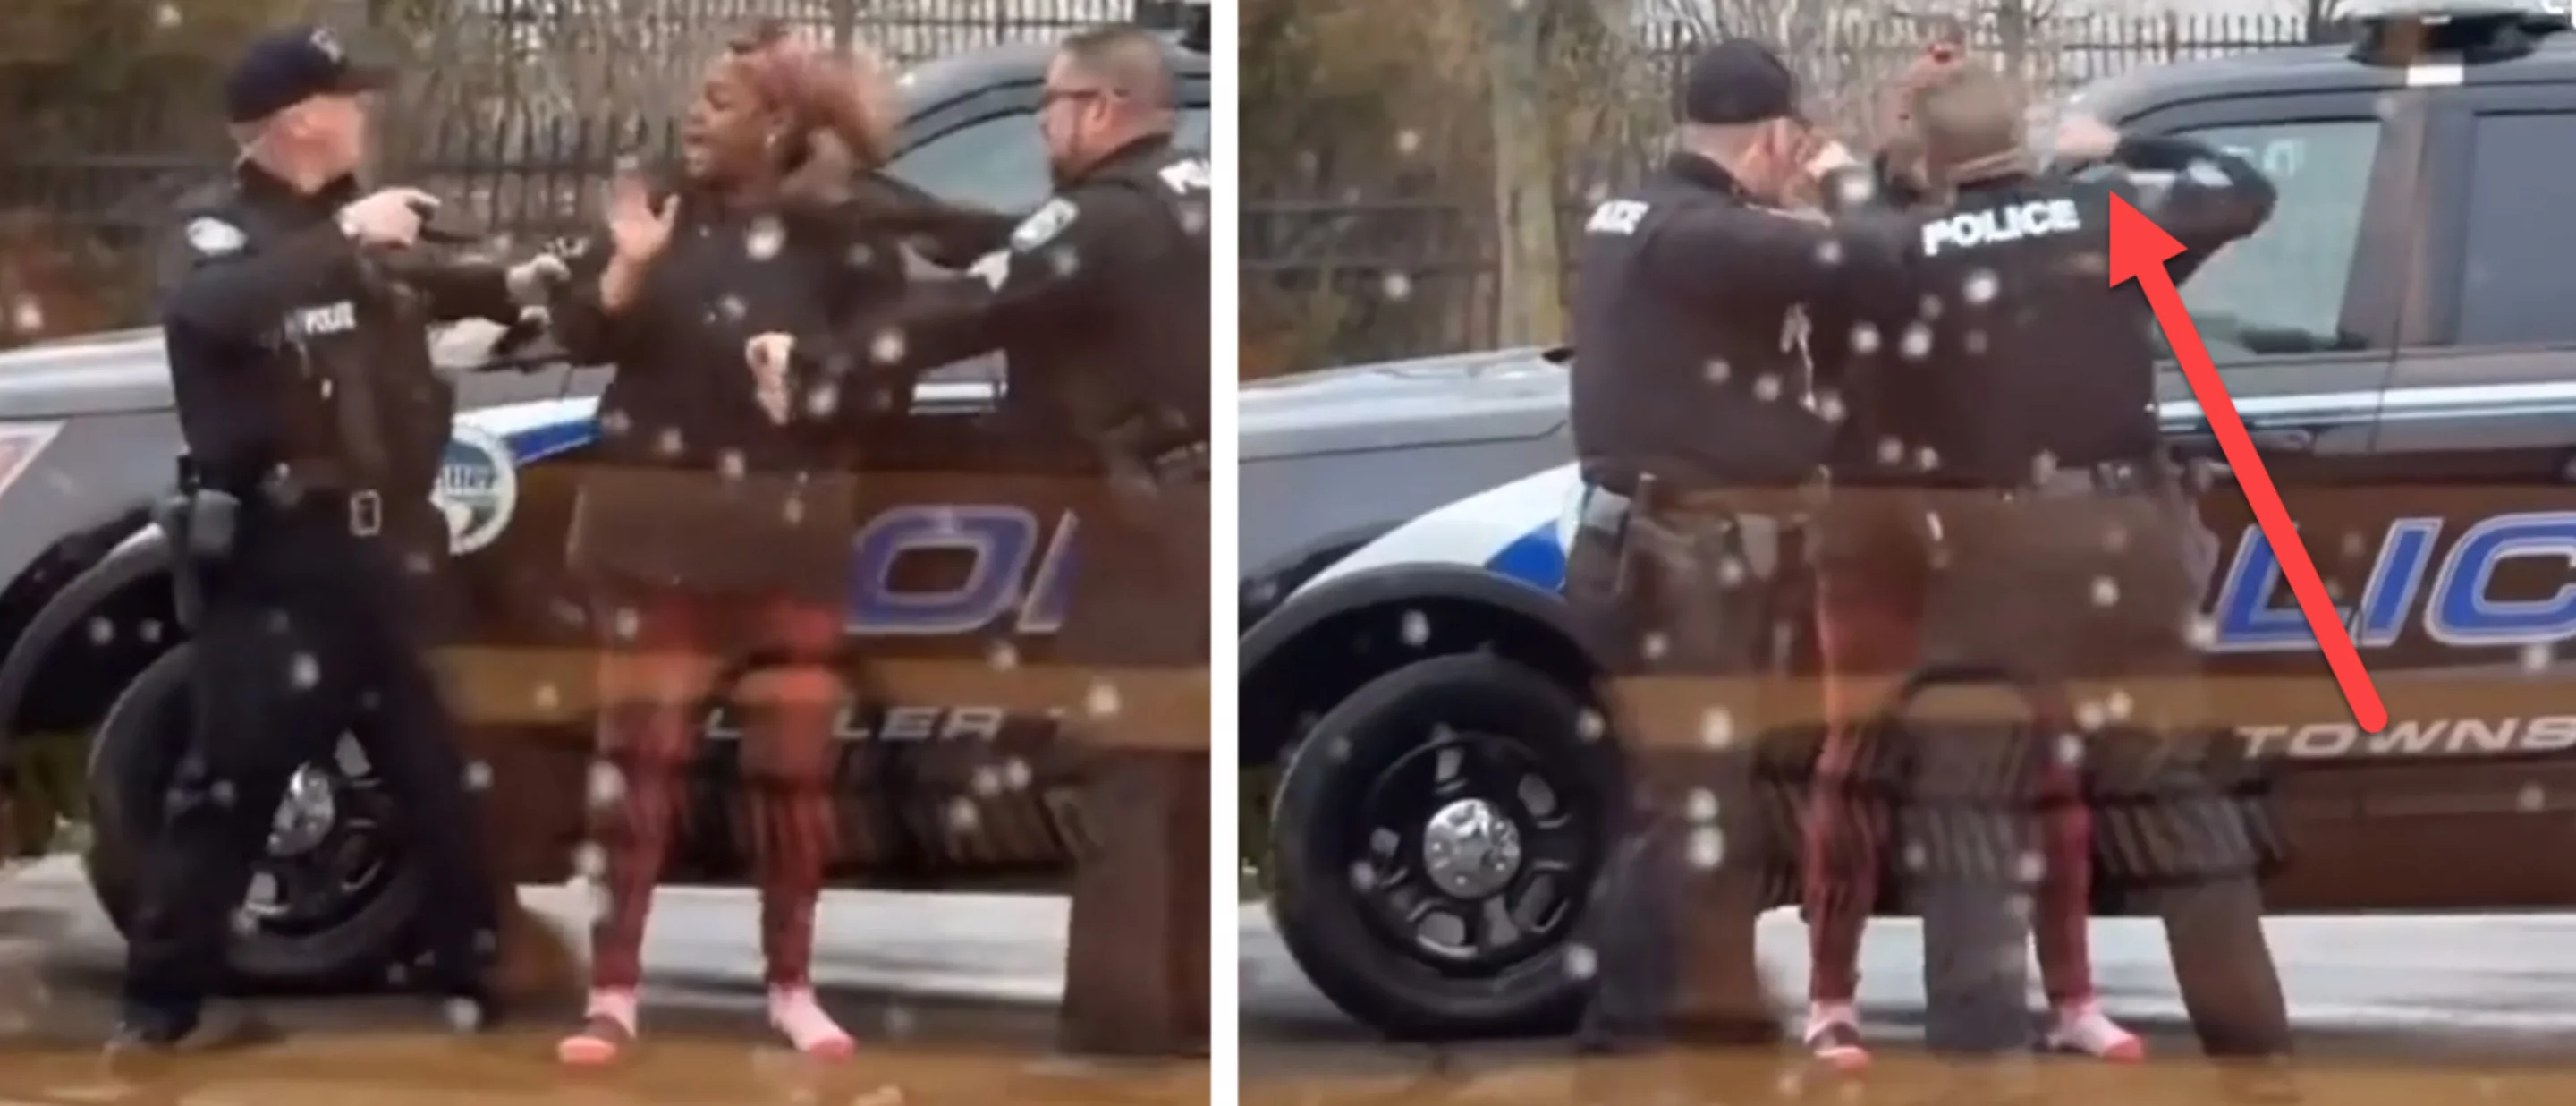 Complain About a Fast Food Order? Cops Could Smash Your Face In